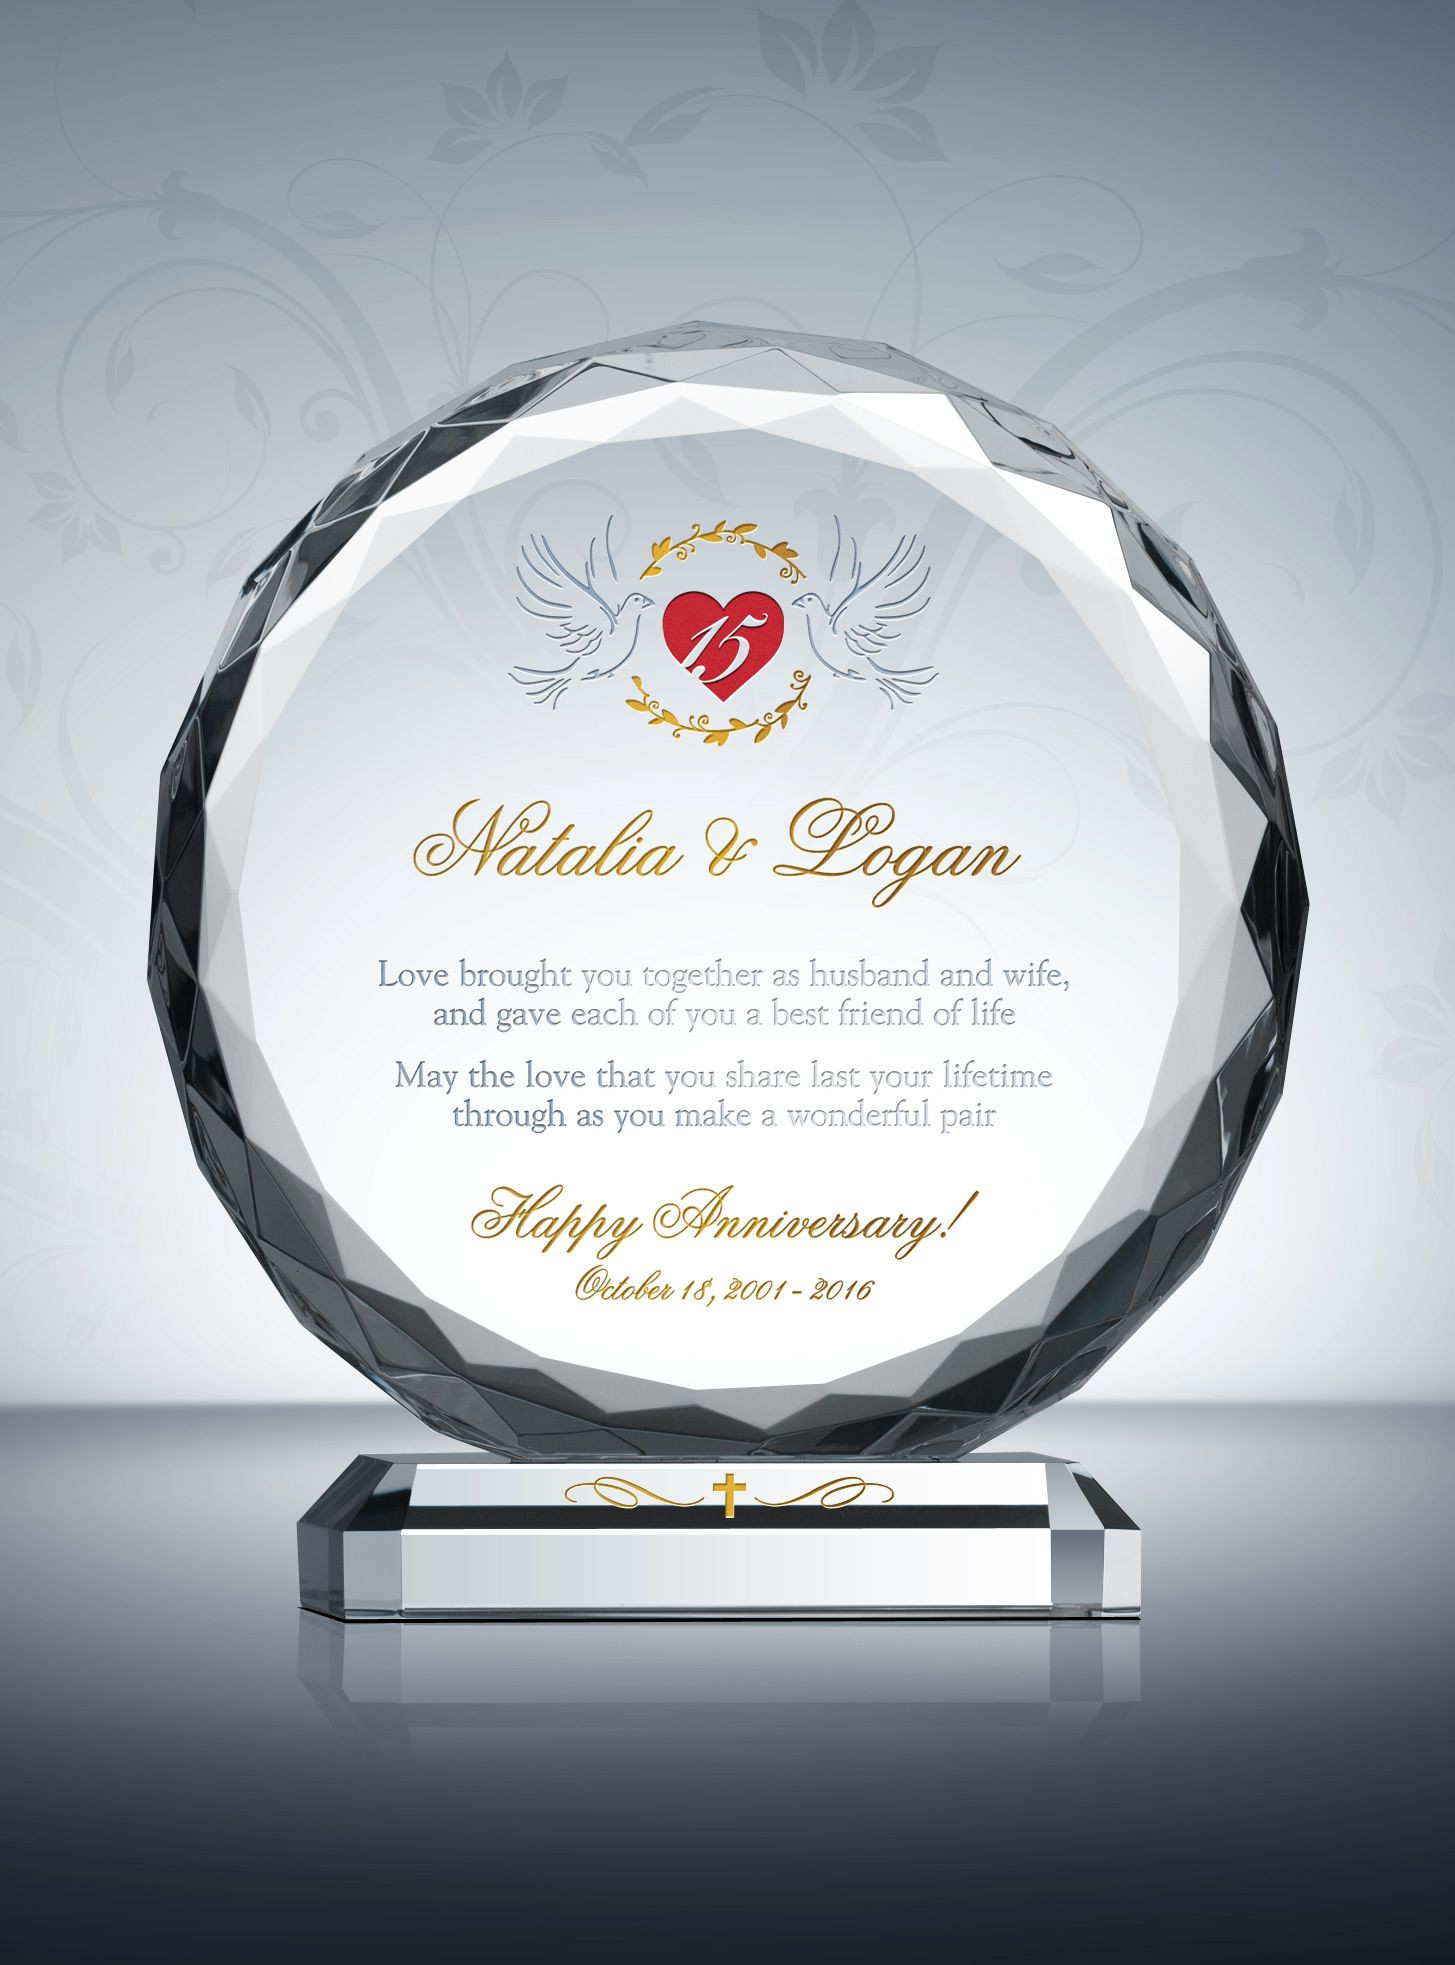 Crystal Anniversary Gift Ideas
 15th Crystal Wedding Anniversary Gifts